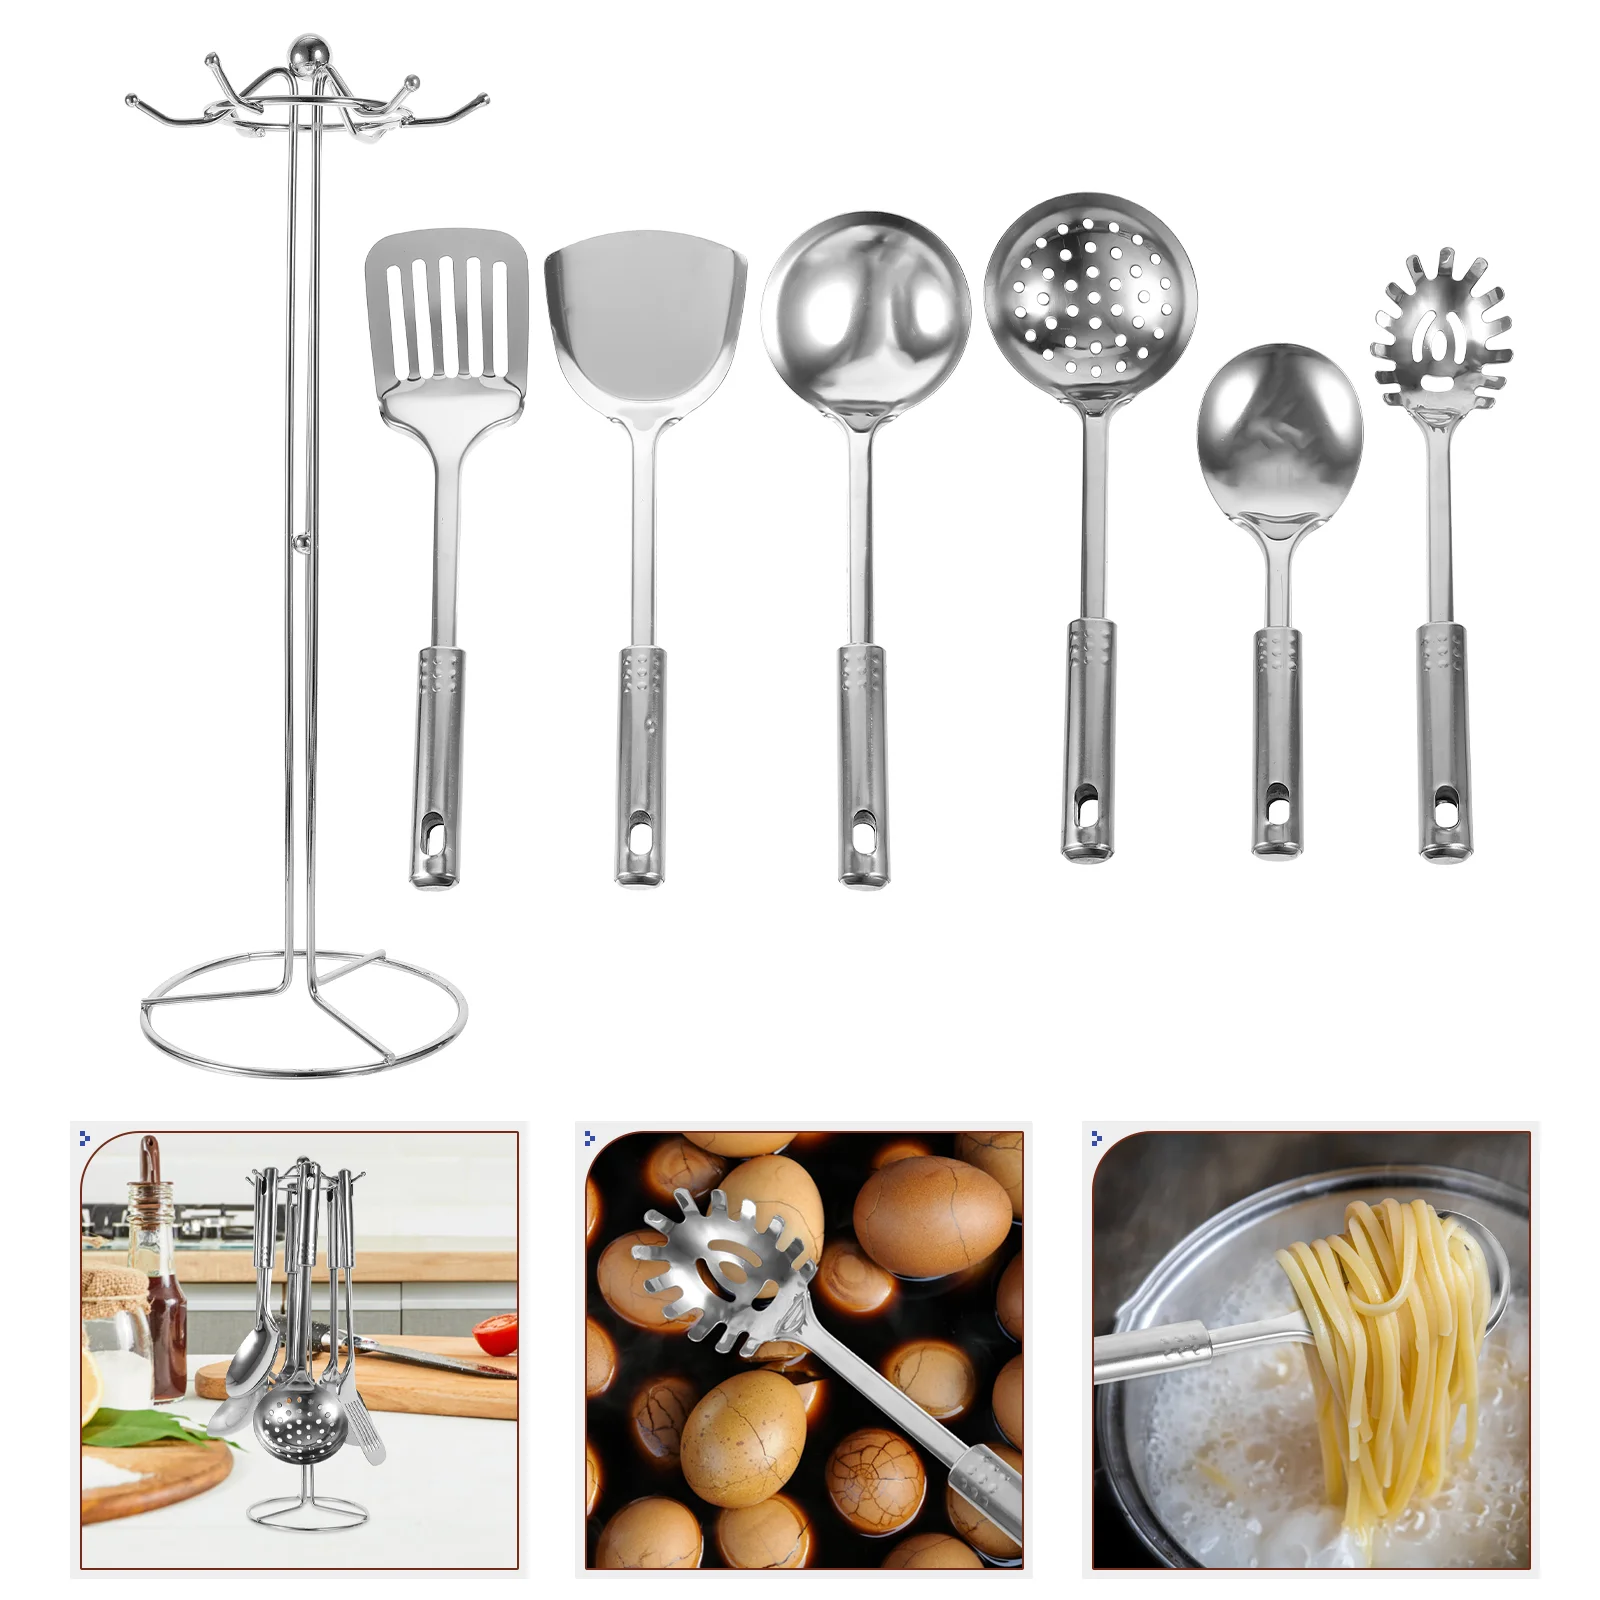 

6pcs Stainless Steel Cooking Utensils Set with Storage Stand Rack Incliuding Spatula Turner Soup Ladle Skimmer Spoon Spaghetti